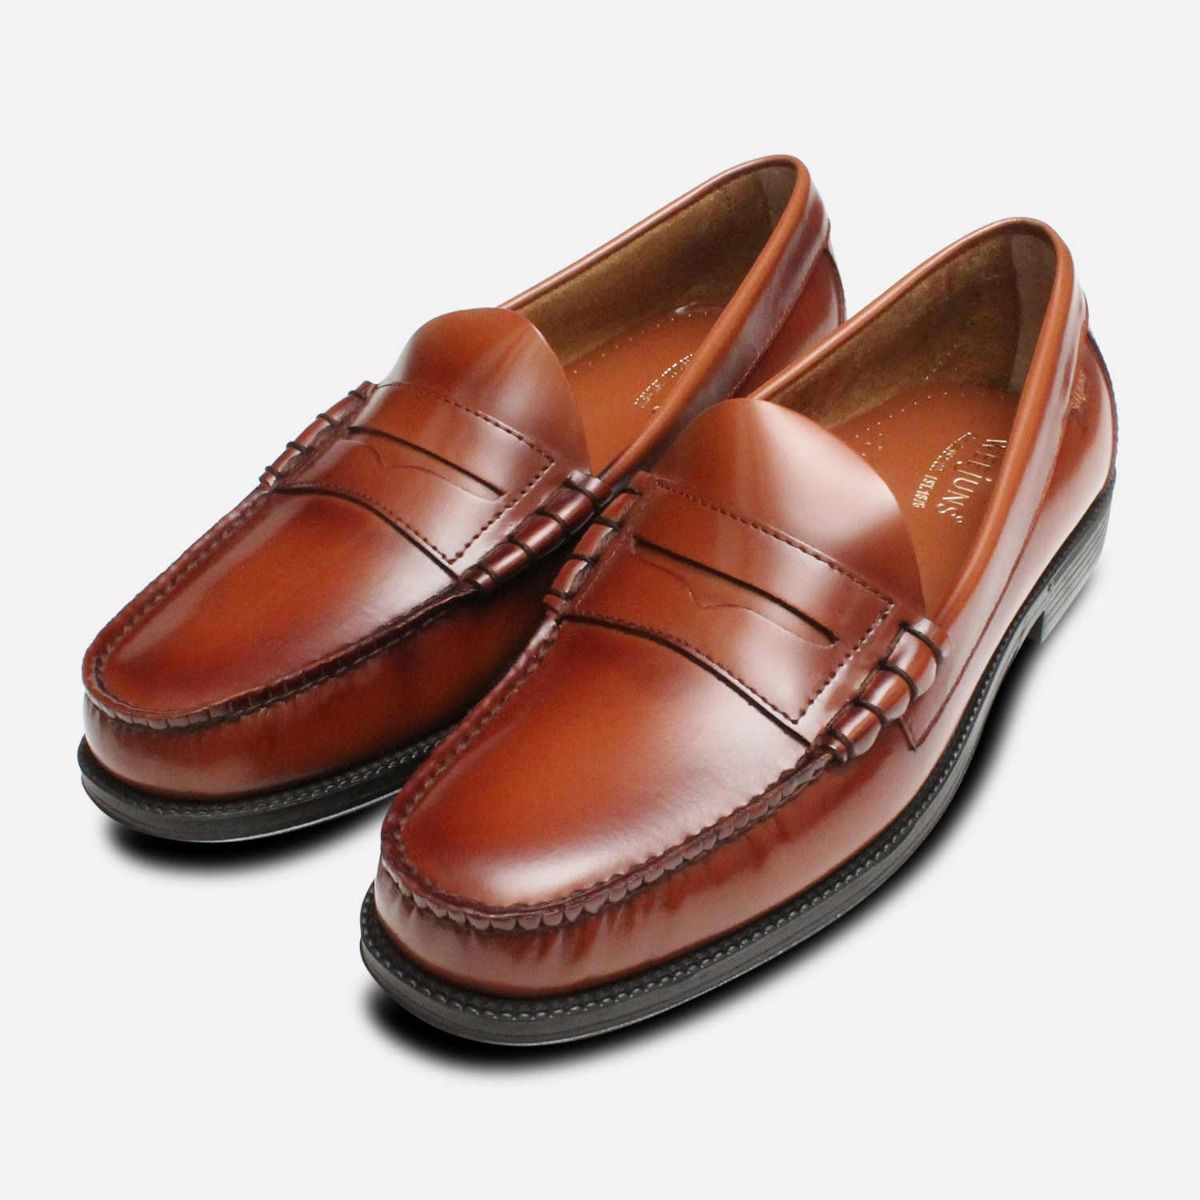 Larson II Brown Penny Loafer Shoes by 